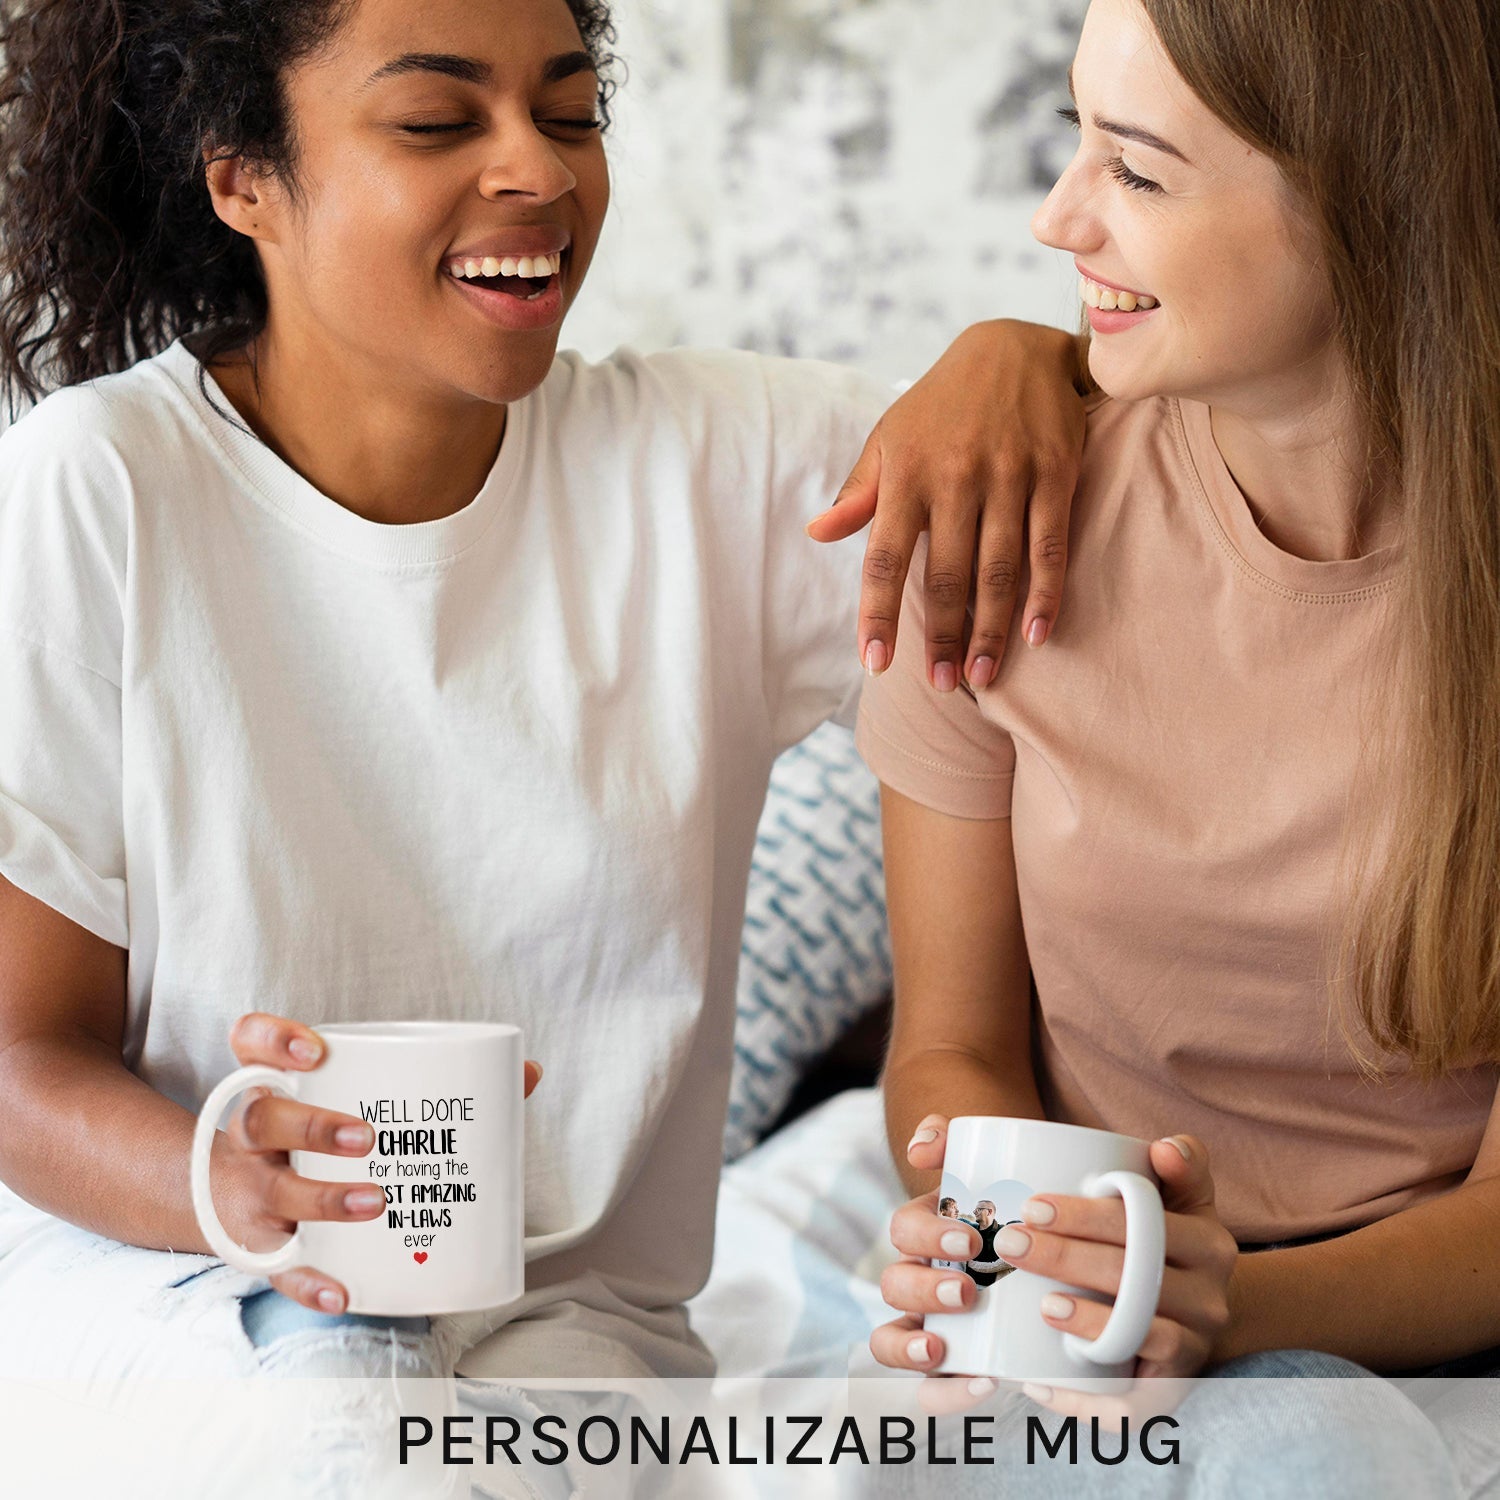 The Most Amazing In-laws Ever - Personalized Birthday or Christmas gift For Son or Daughter In Law - Custom Mug - MyMindfulGifts